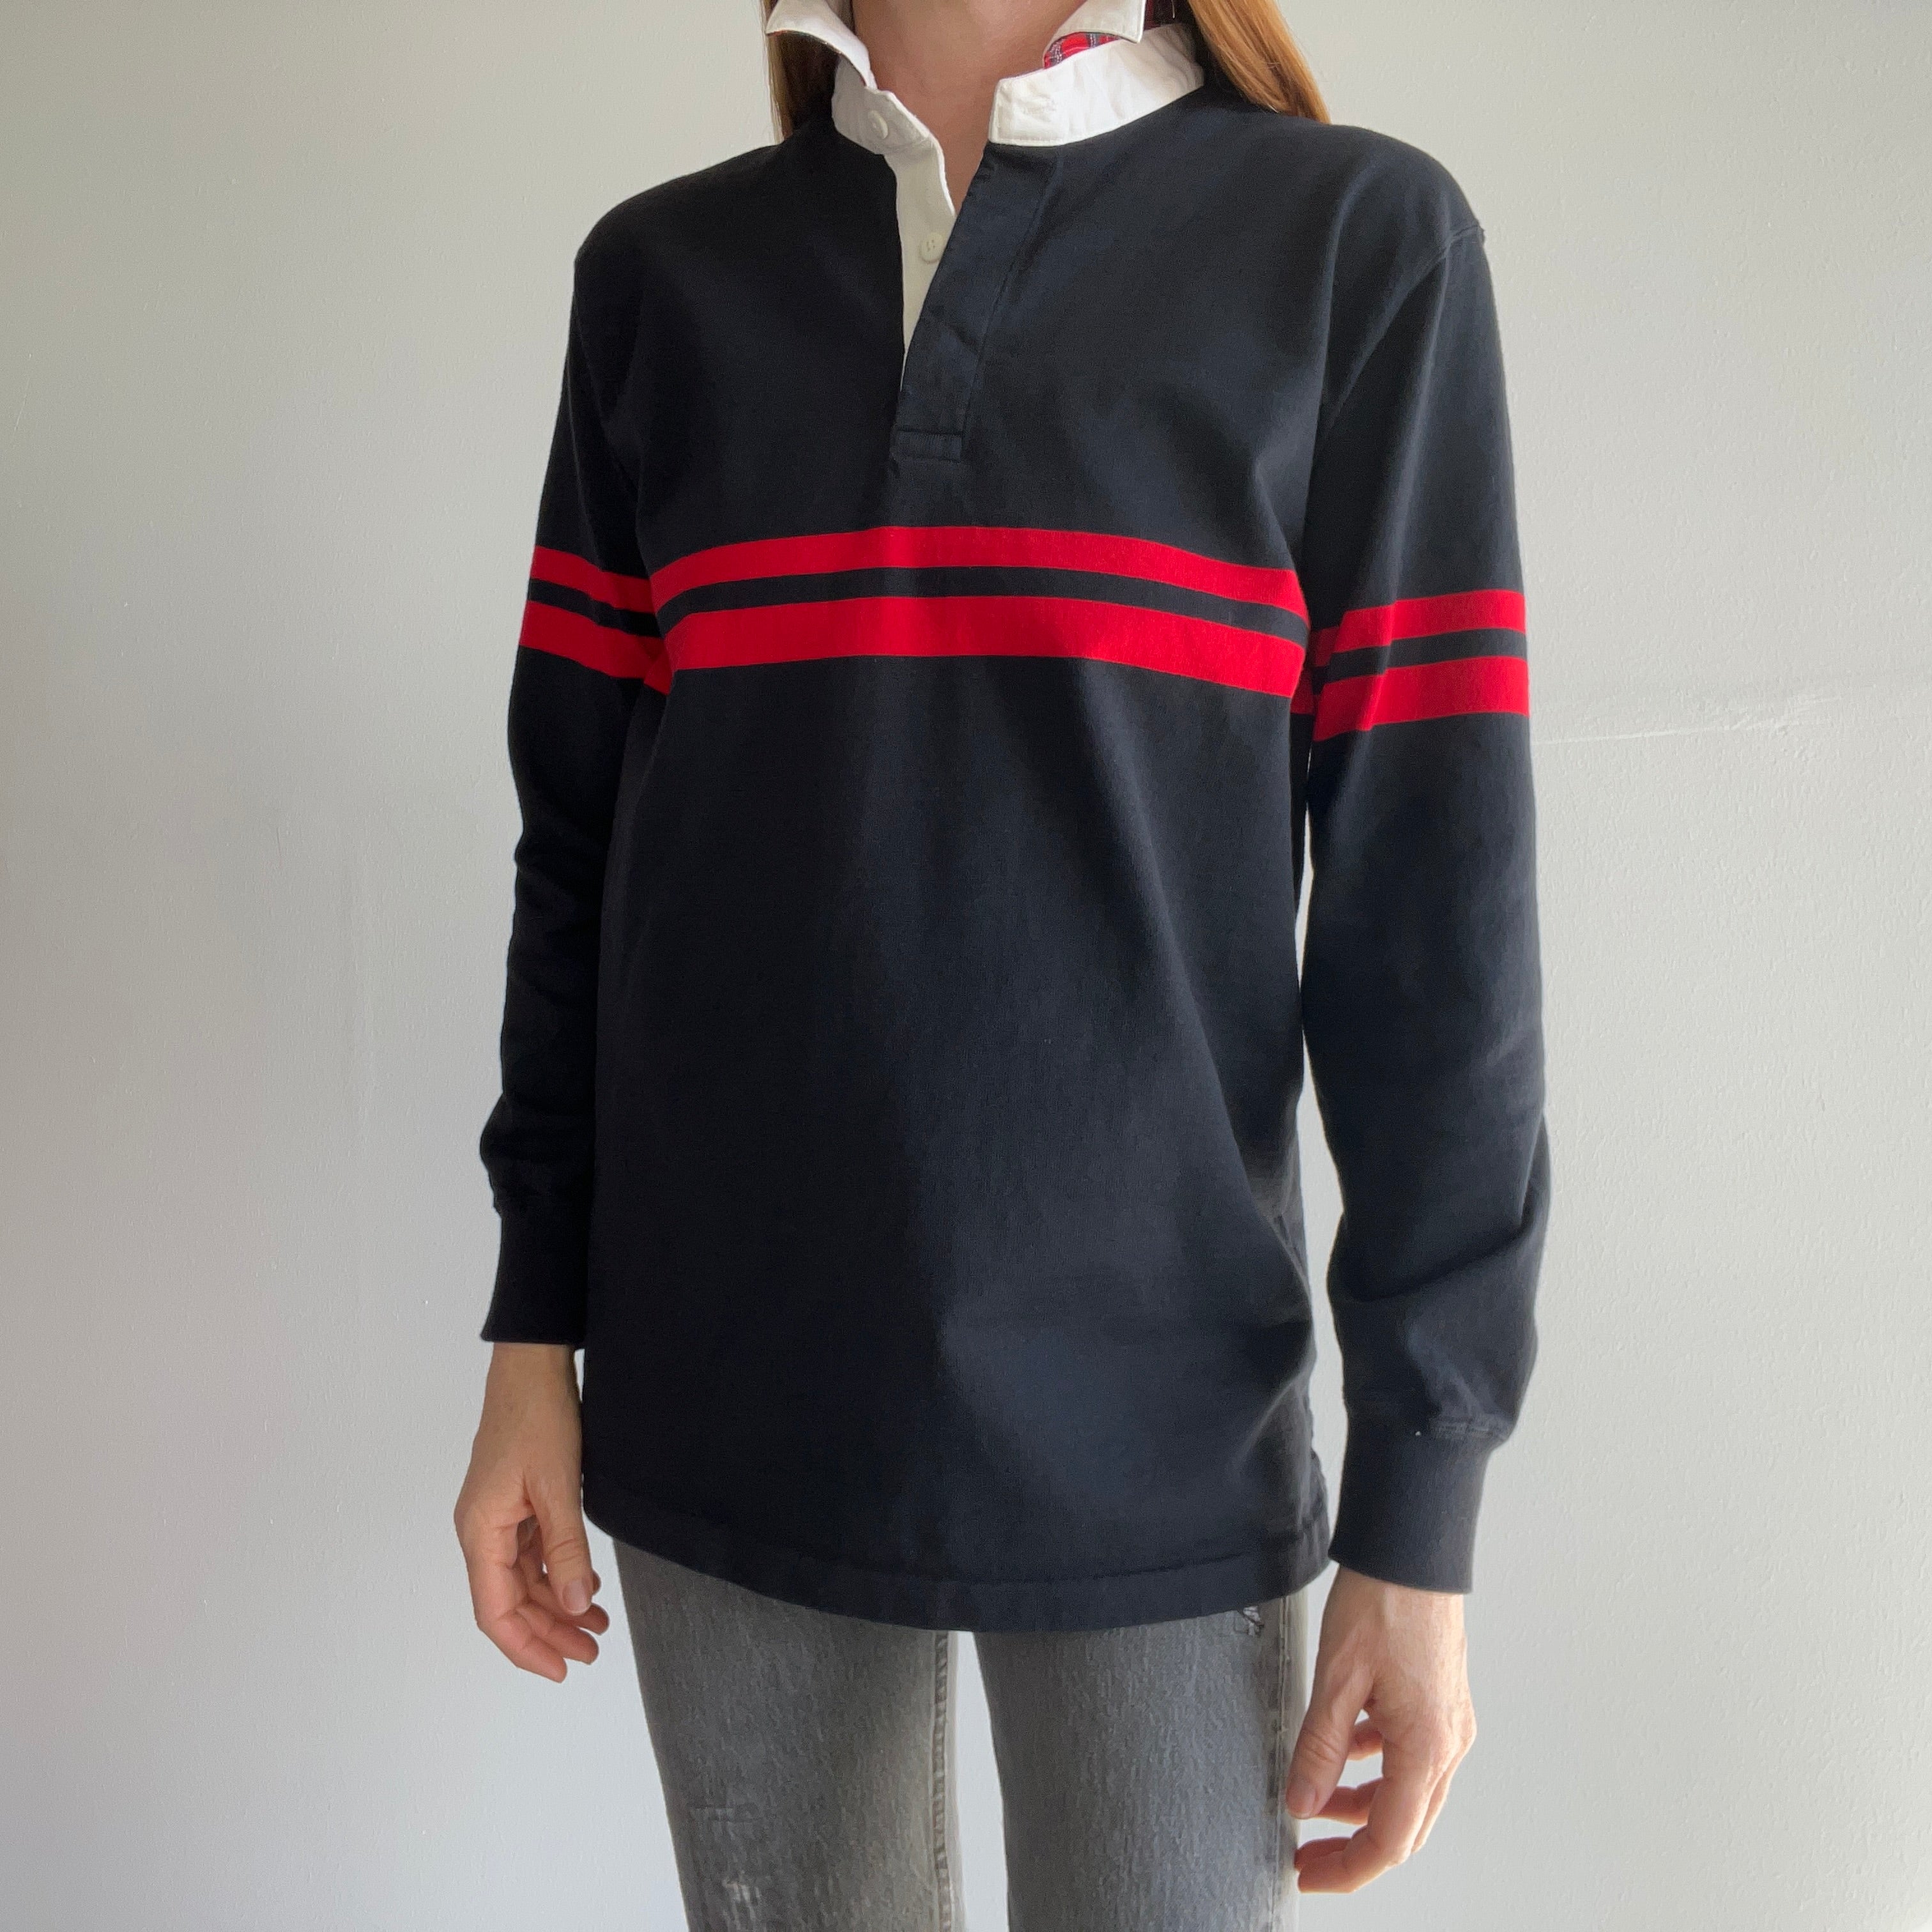 1980s Izod Rugby Shirt with Plaid Accents Under The Collar